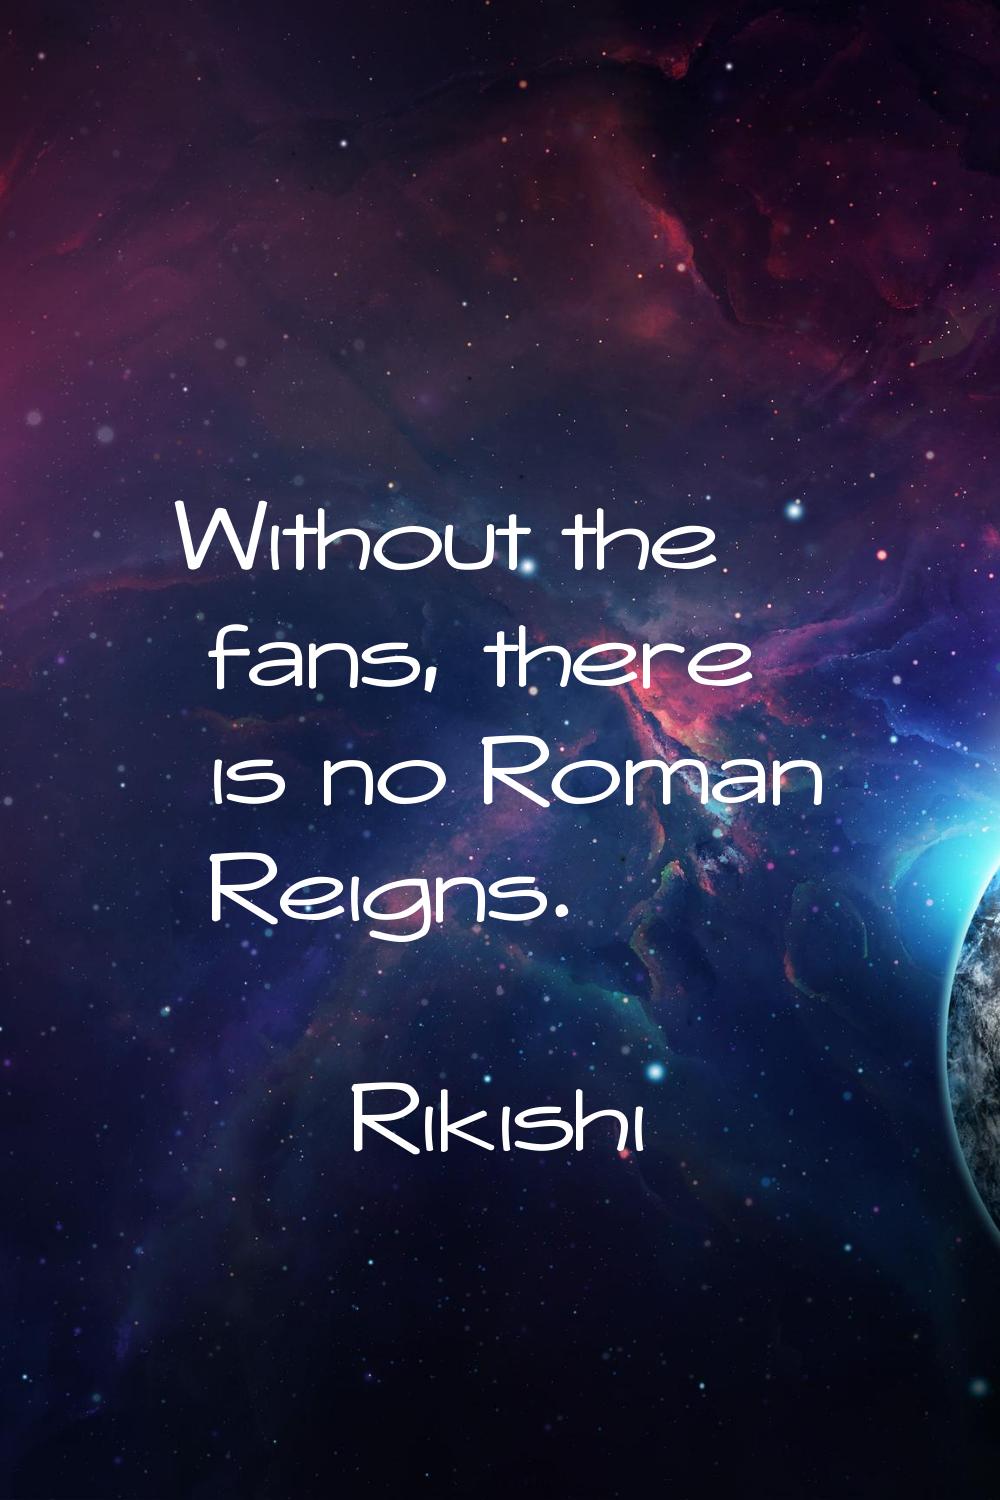 Without the fans, there is no Roman Reigns.